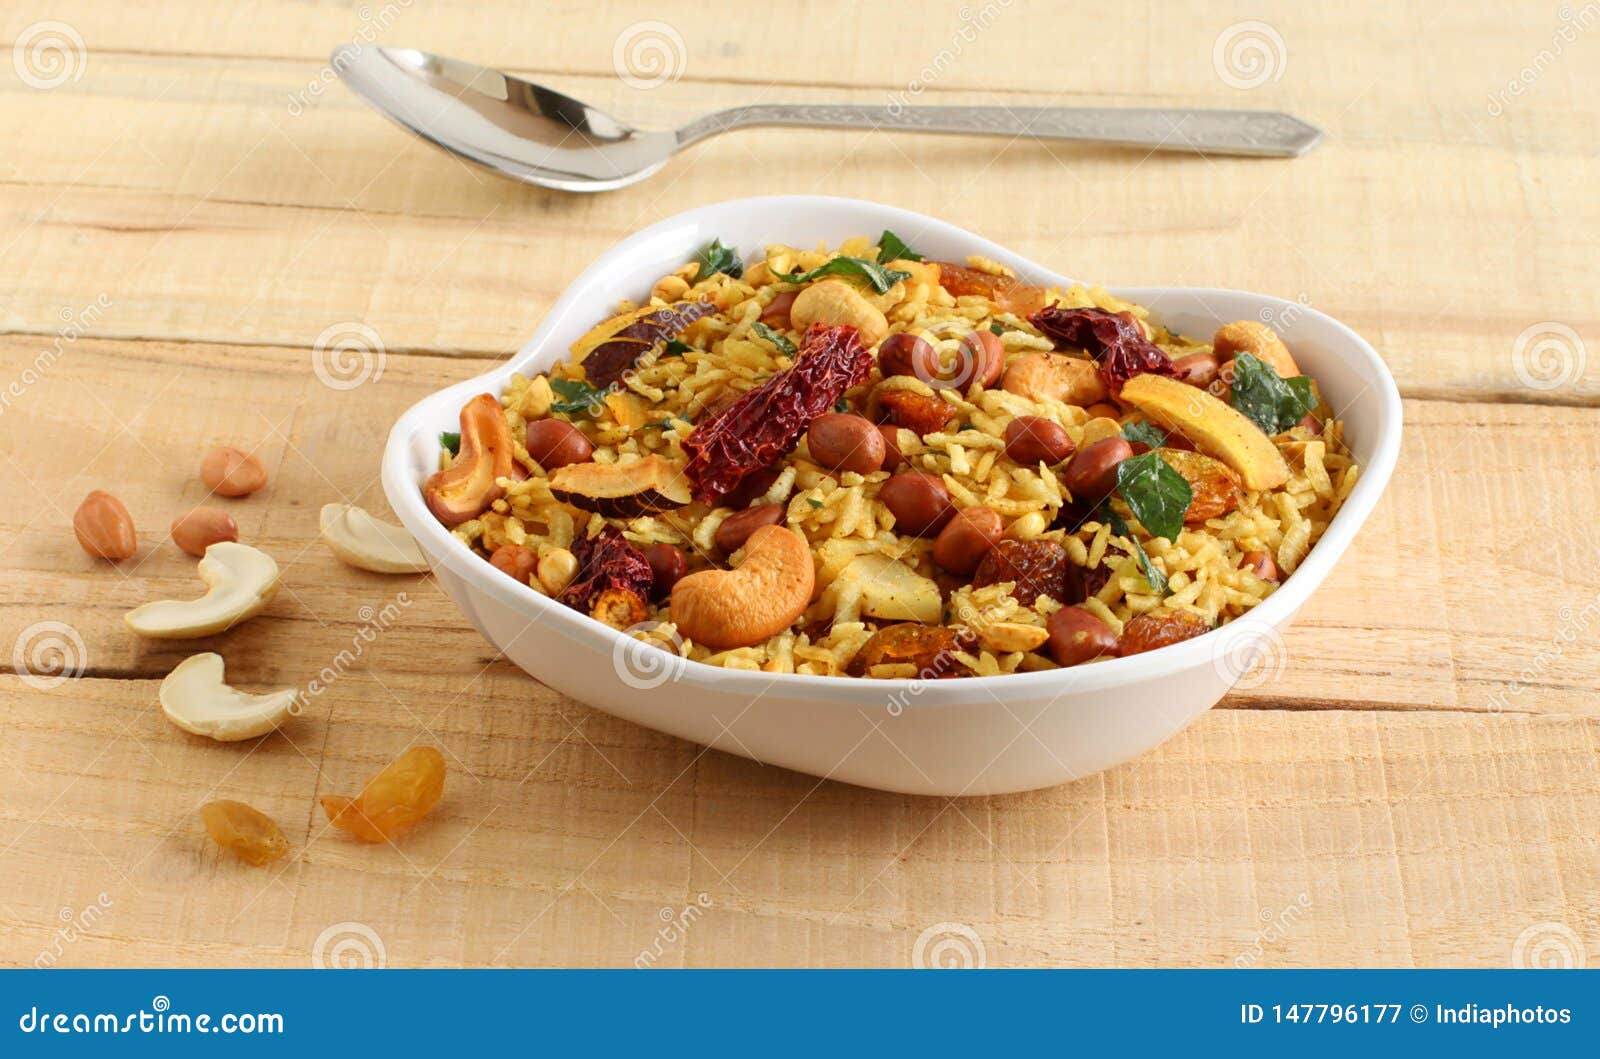 poha chivda indian snack with flattened rice as main ingredient